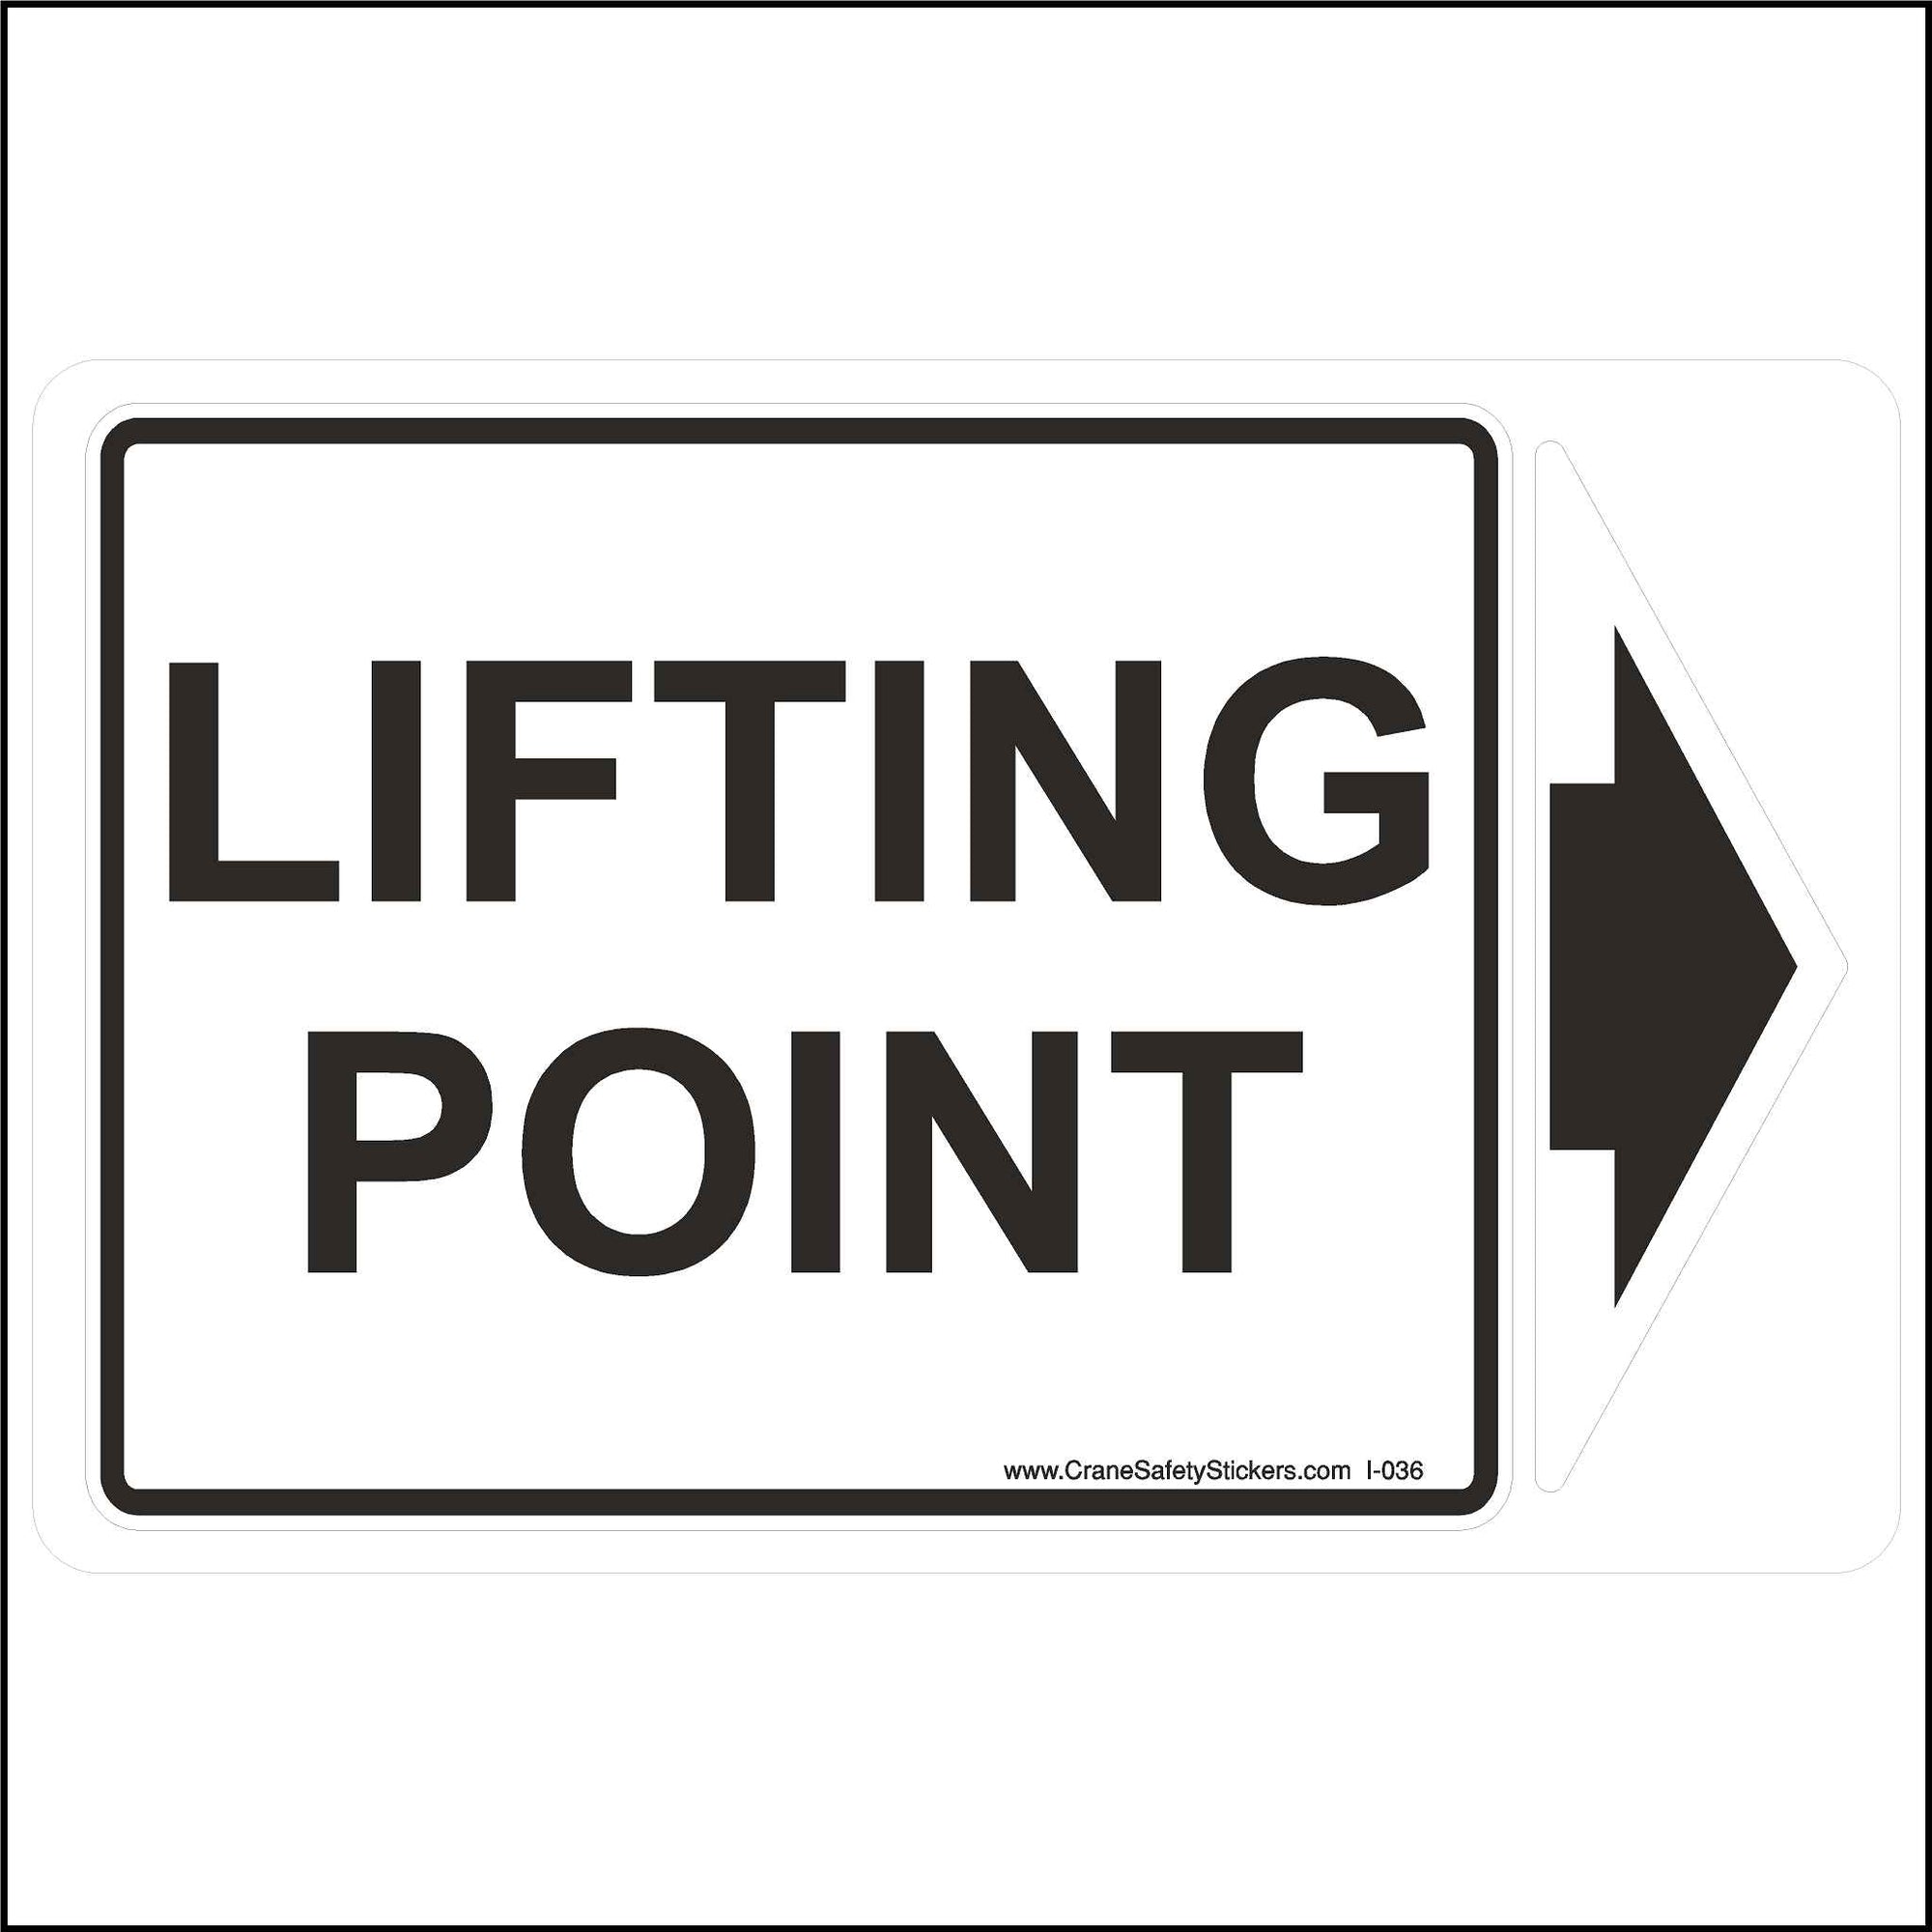 Lift point stickers. One printed with the words in Lifting Point in black. The other is an arrow printed in black.